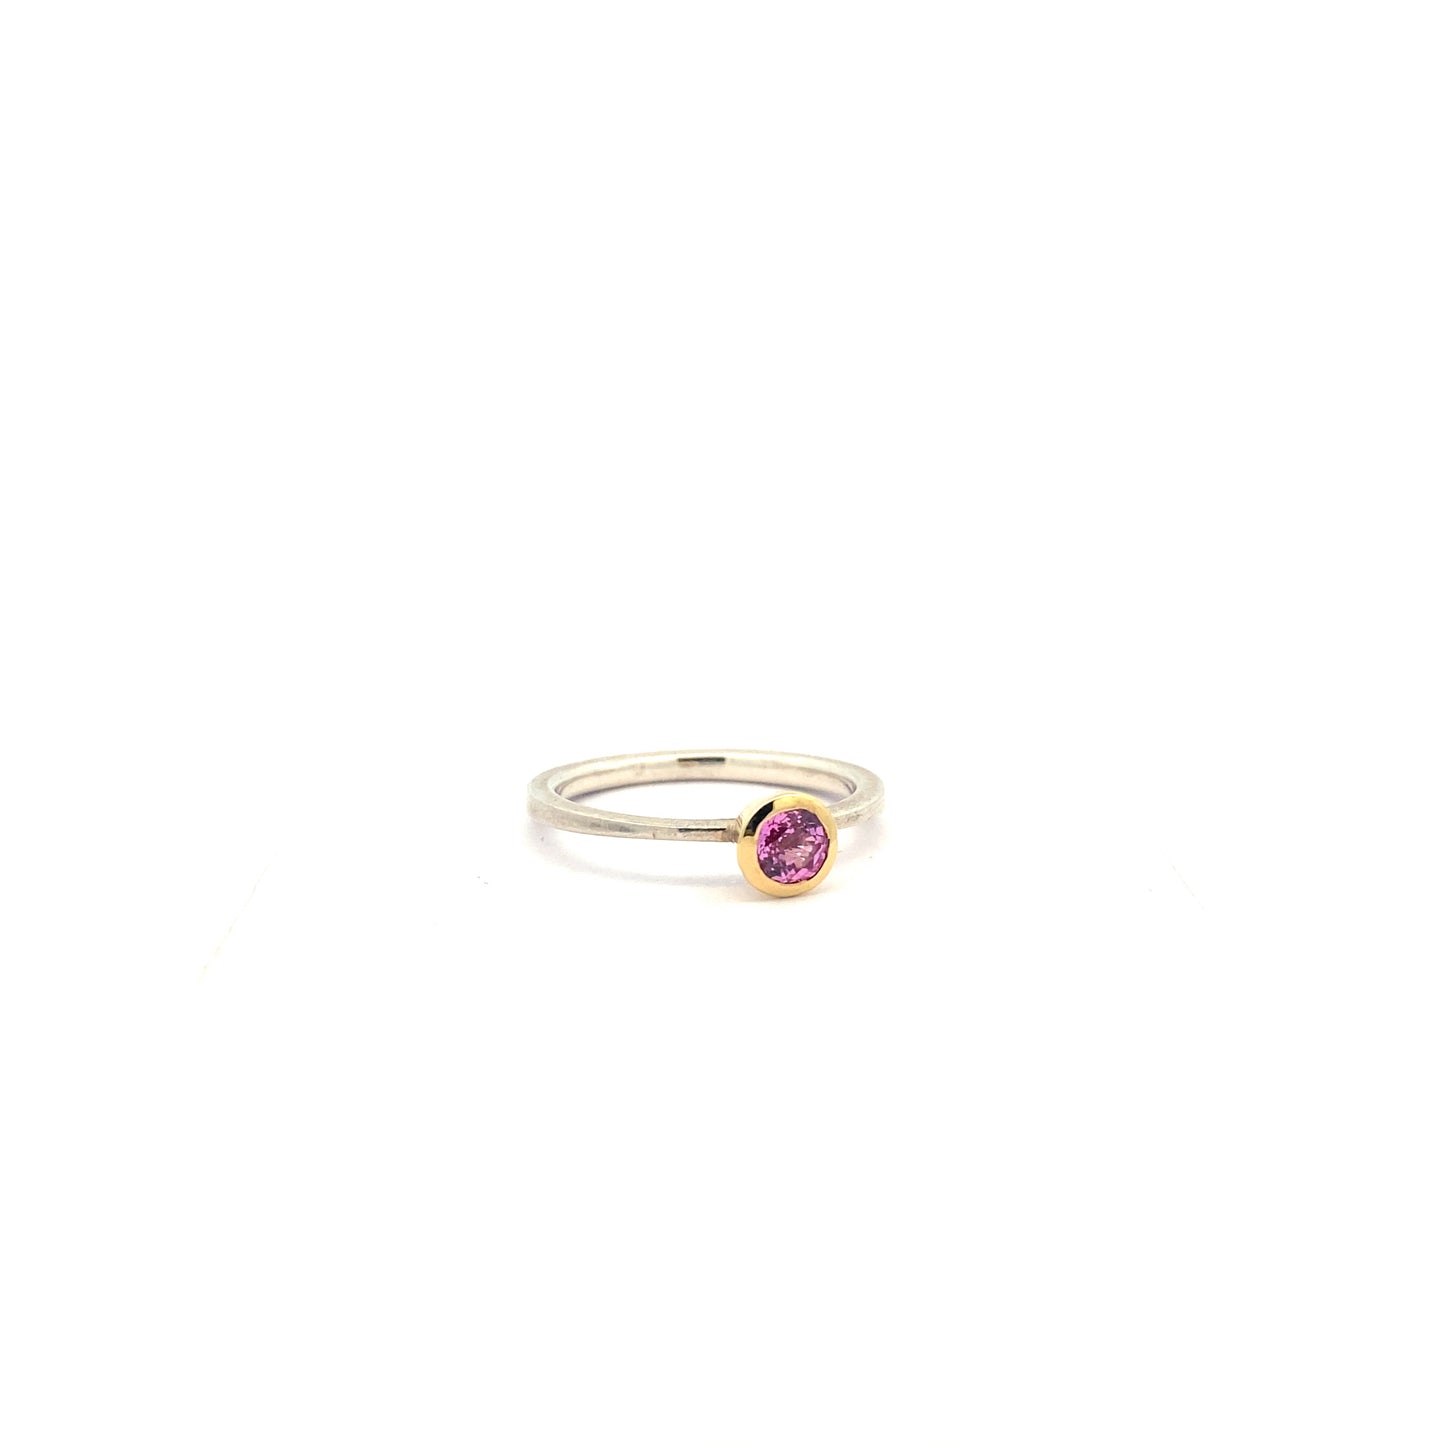 Elegant Pink Sapphire Ring with Tapered Band